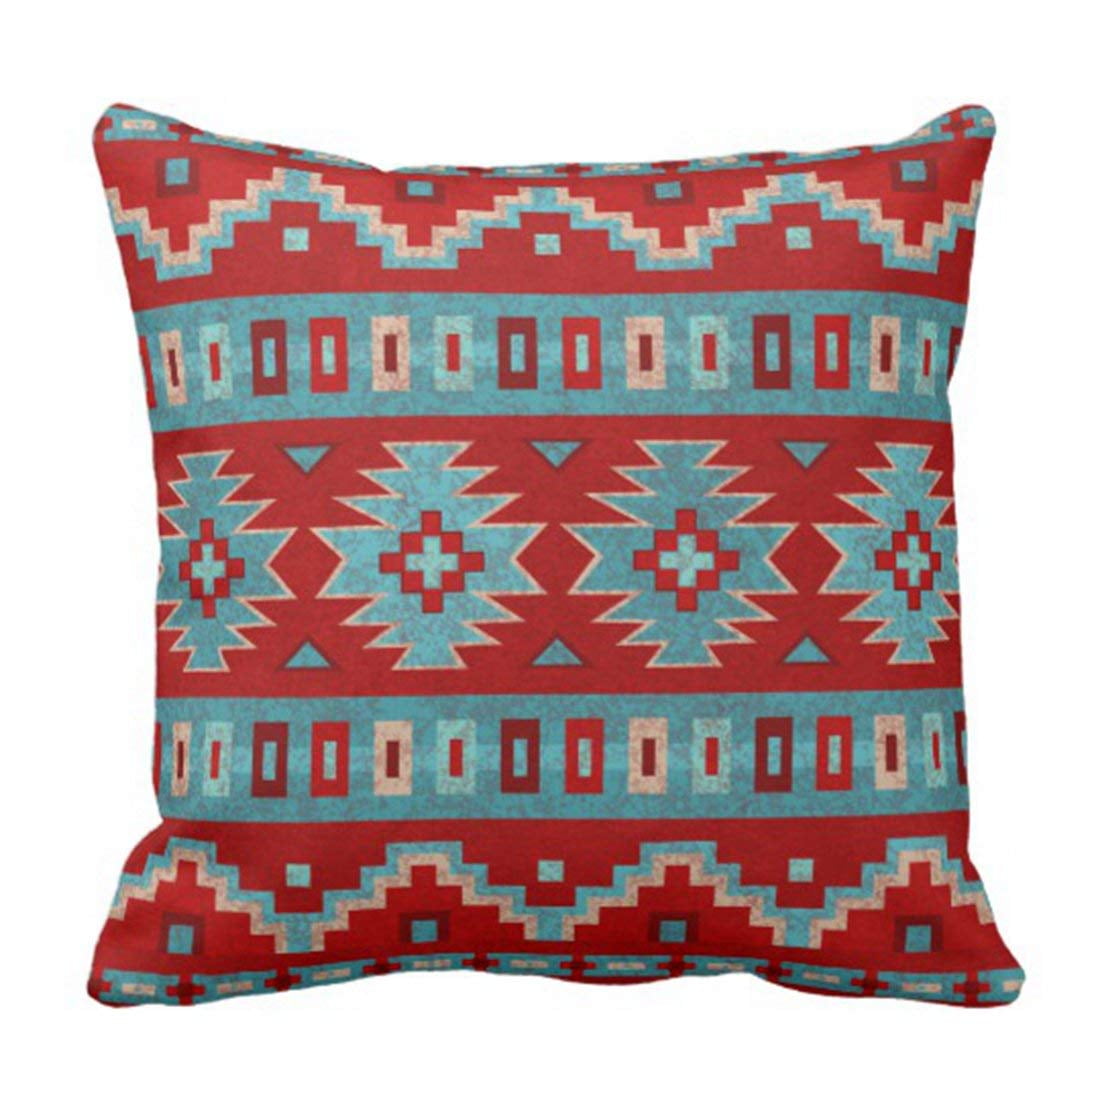 Threads West Throw Pillow Covers 18 X 18 Inches Hand Crafted Western Decorative Pillow Cases and Native American Styles Hand Woven Southwest Beige Mexican